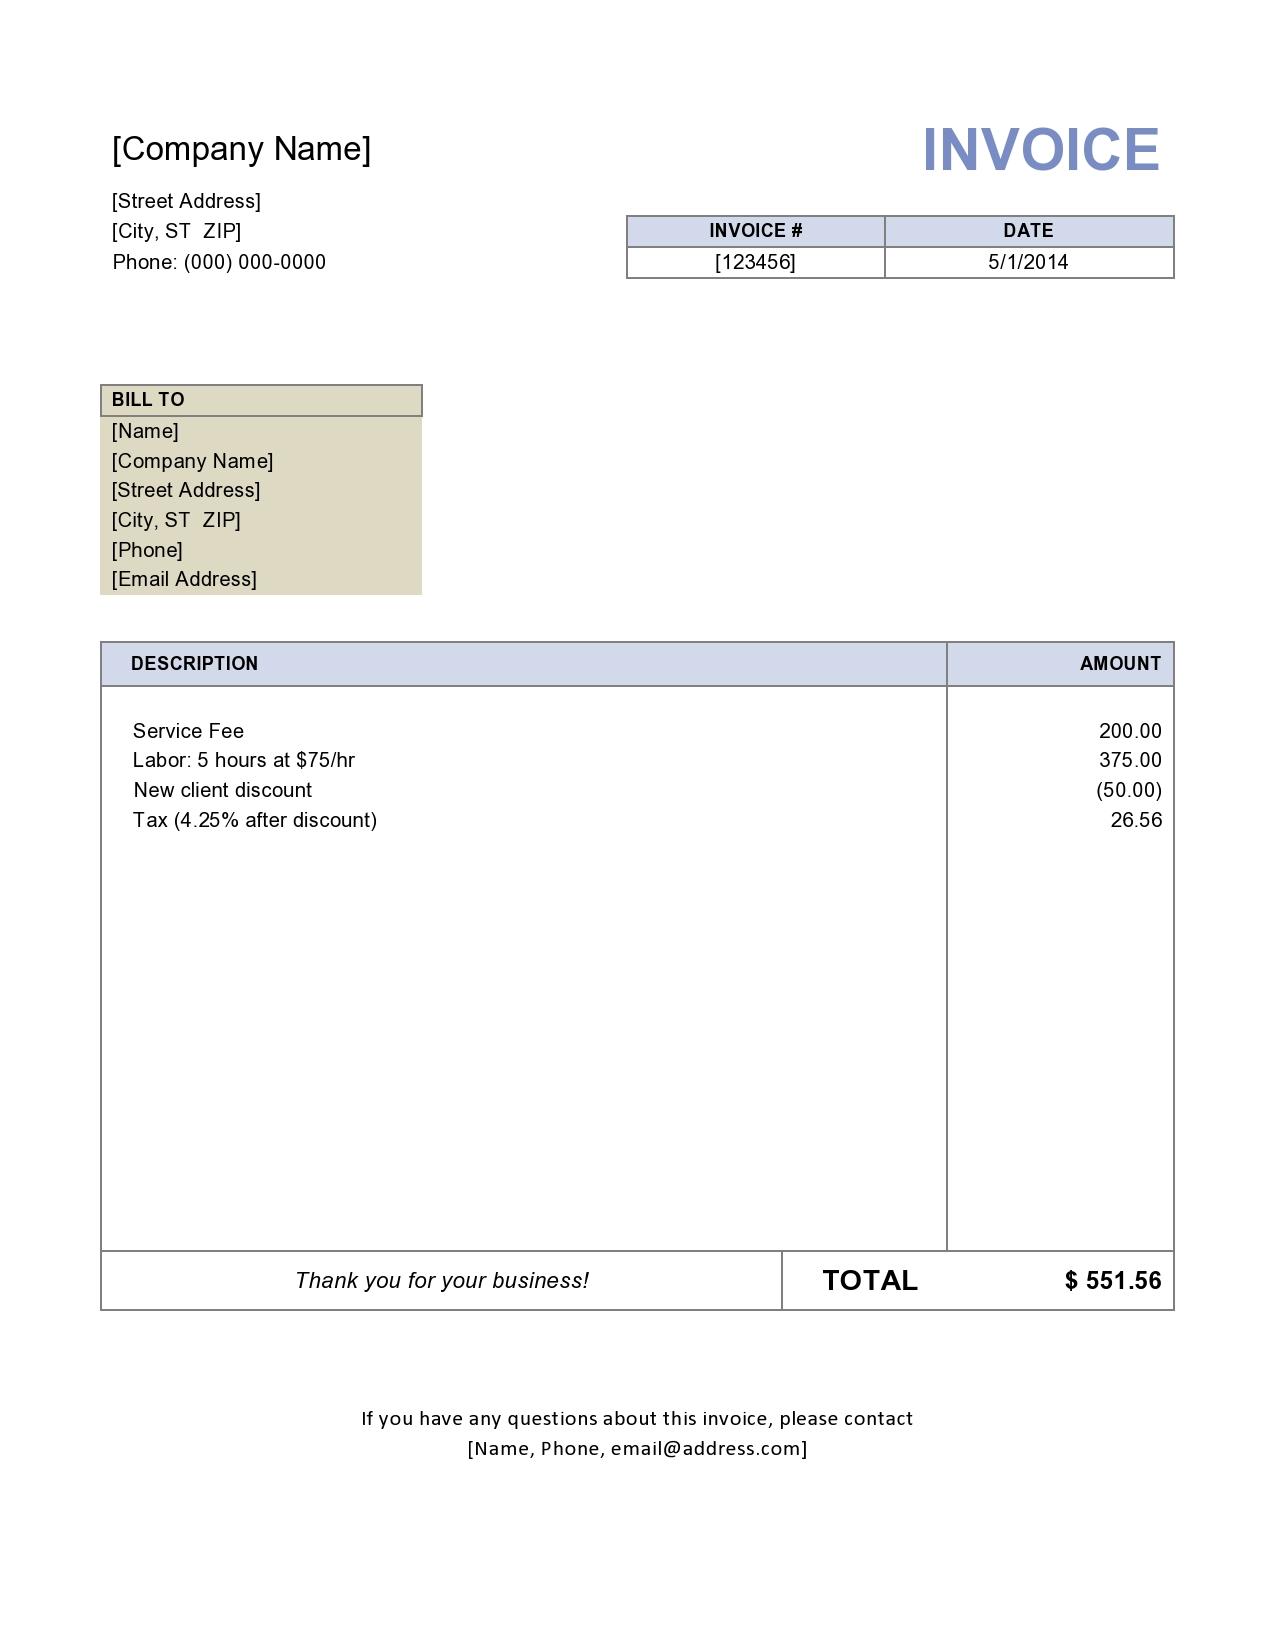 Roofing Invoice Template Free